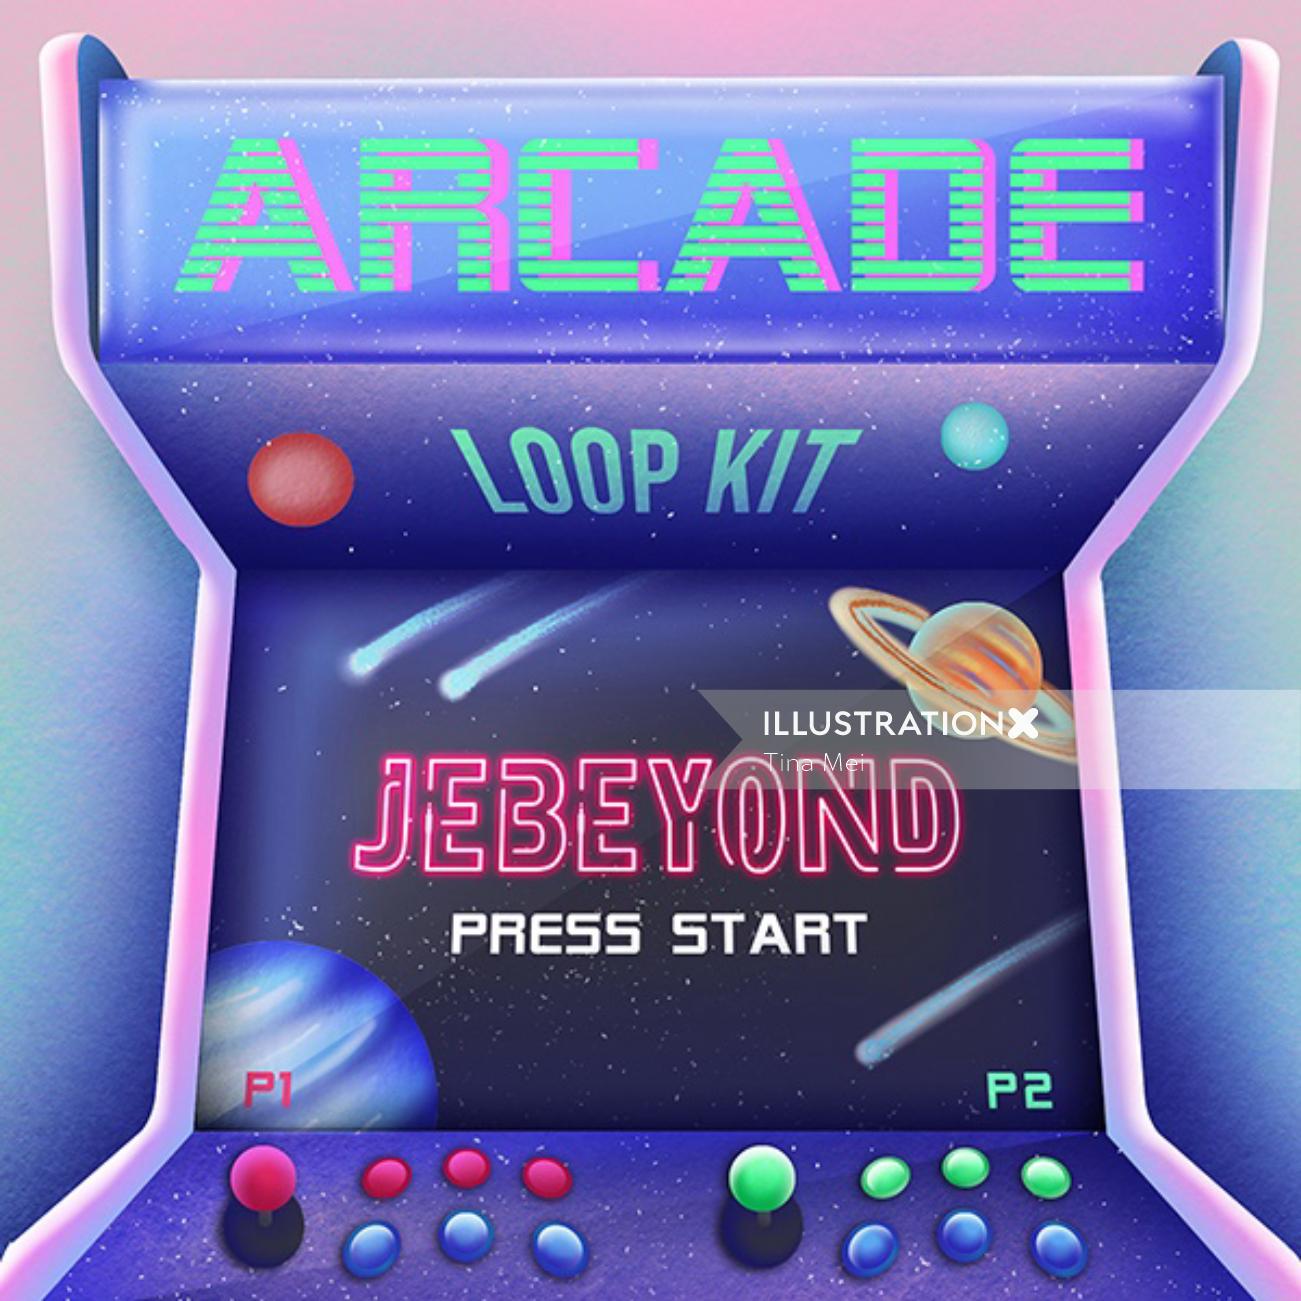 Arcade loop kit music cover illustration for music producer Jebeyond